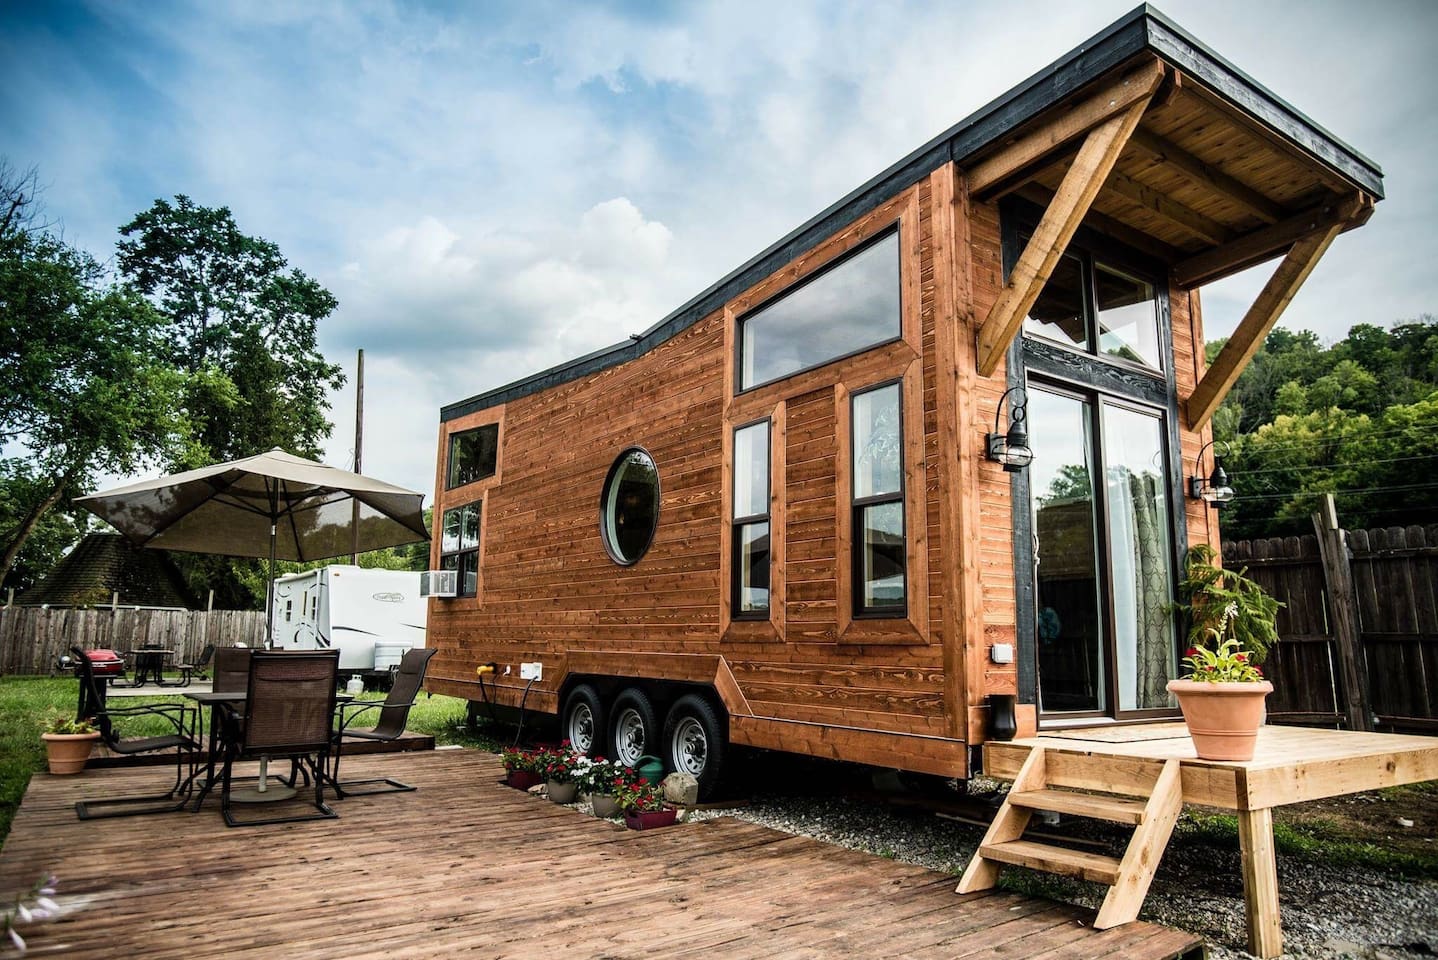  TINY  HOUSE  TOWN The Industrial From Wheel  Life Tiny  Homes 